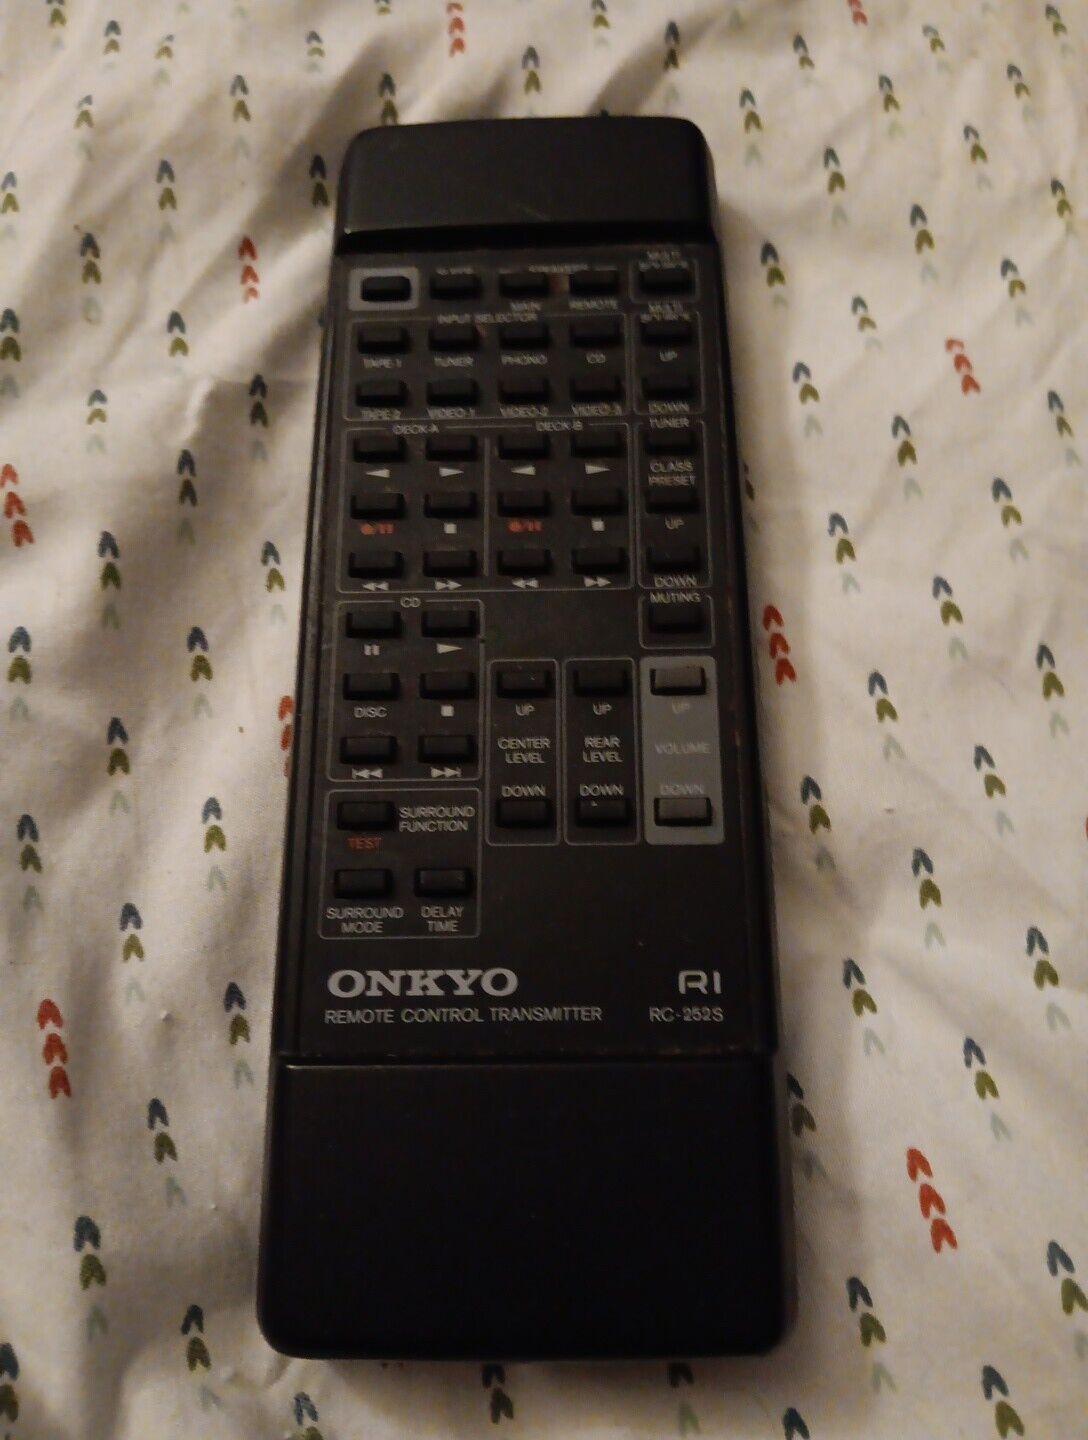 ONKYO R1 RC-252S Remote Control Transmitter, Super Clean, Tested